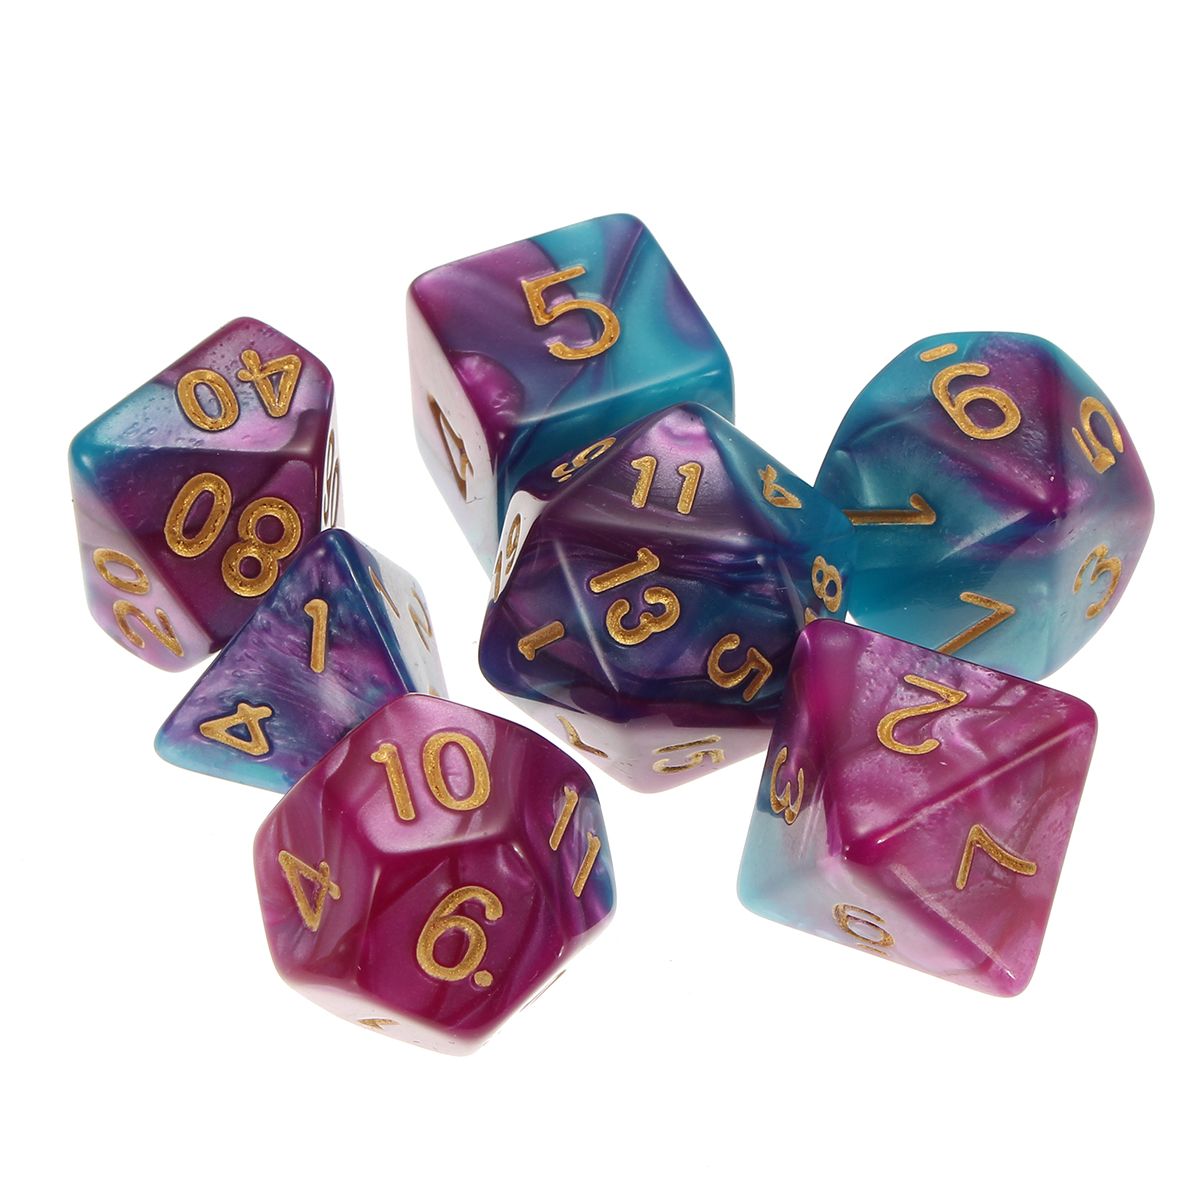 42-Pieces-Polyhedral-Dice-Set-Multisided-Dices-Role-Playing-Games-Gadget-1260359